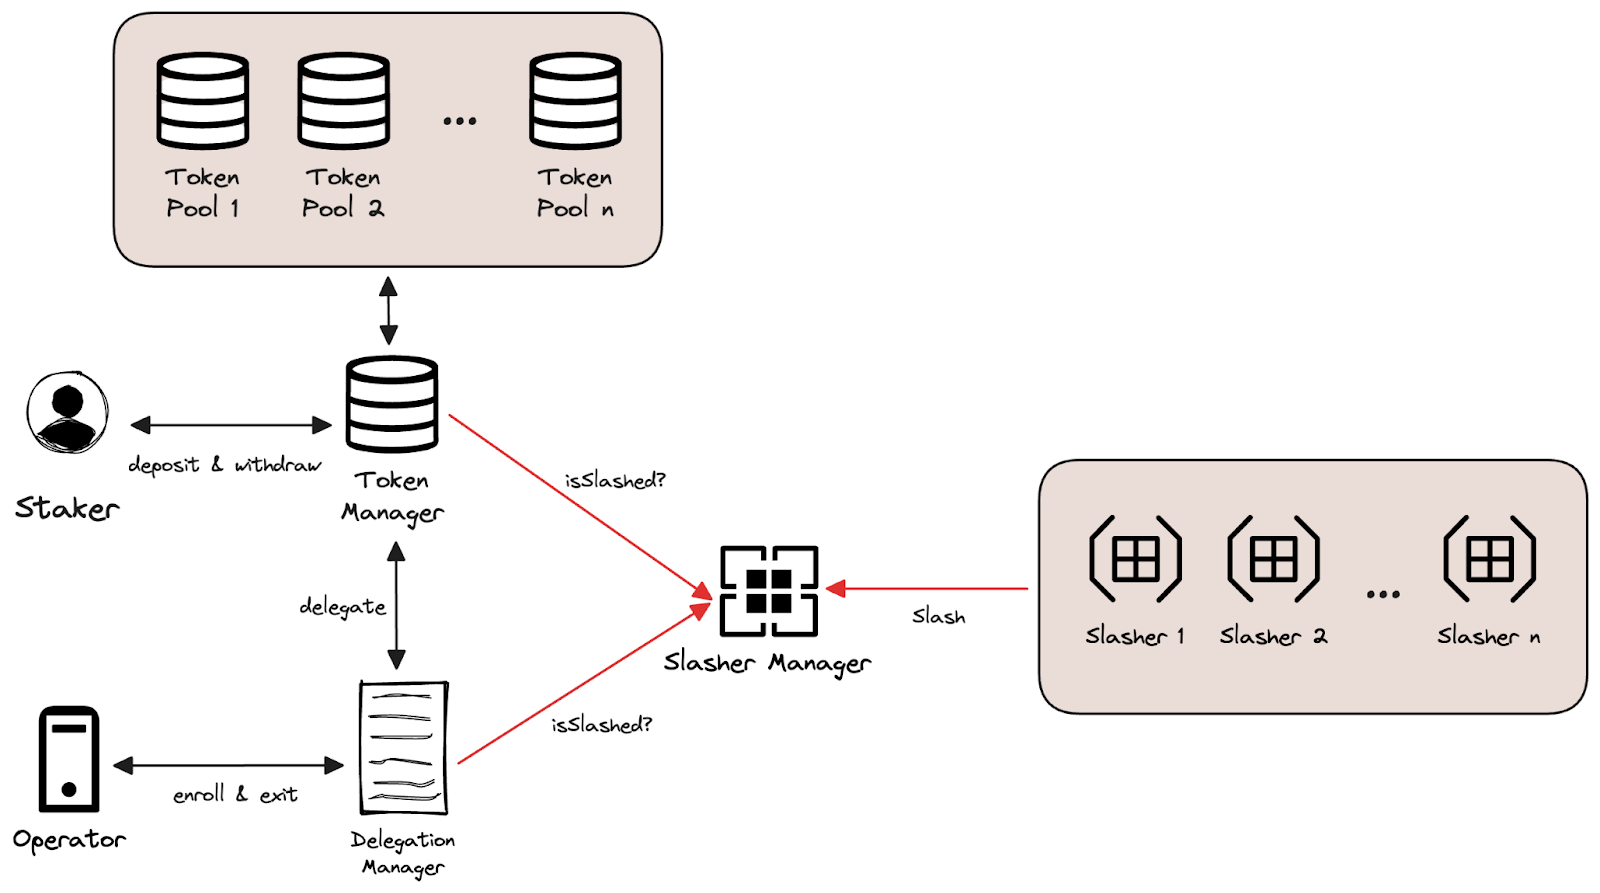 This illustration provides a basic overview of the EigenLayer protocol and details the tasks of its three main software managers. These include: 1.) the token manager, which is tasked with handling staking and withdrawals for stakers; 2.) the delegation manager, which allows operators to register and track operator shares, and 3.) the slasher manager, which provides AVS developers the required interface needed to determine slashing logic. (Image Credit: You Could’ve Invented EigenLayer via the EigenLayer blog)